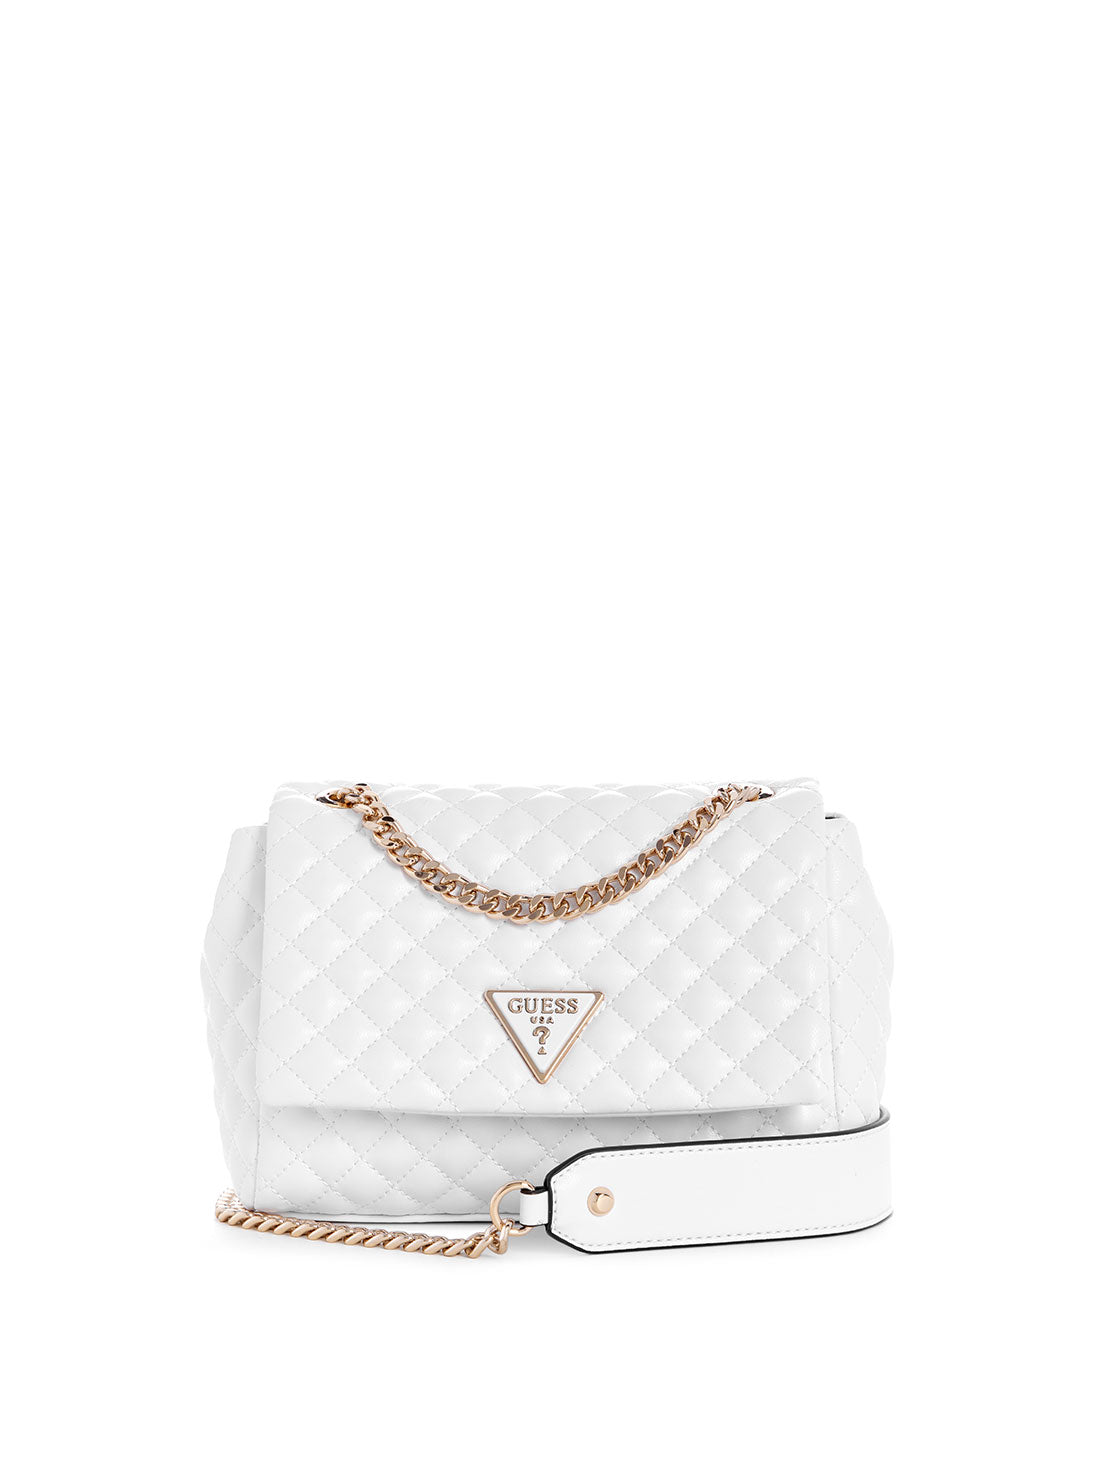 GUESS White Rianee Crossbody Flap Bag front view